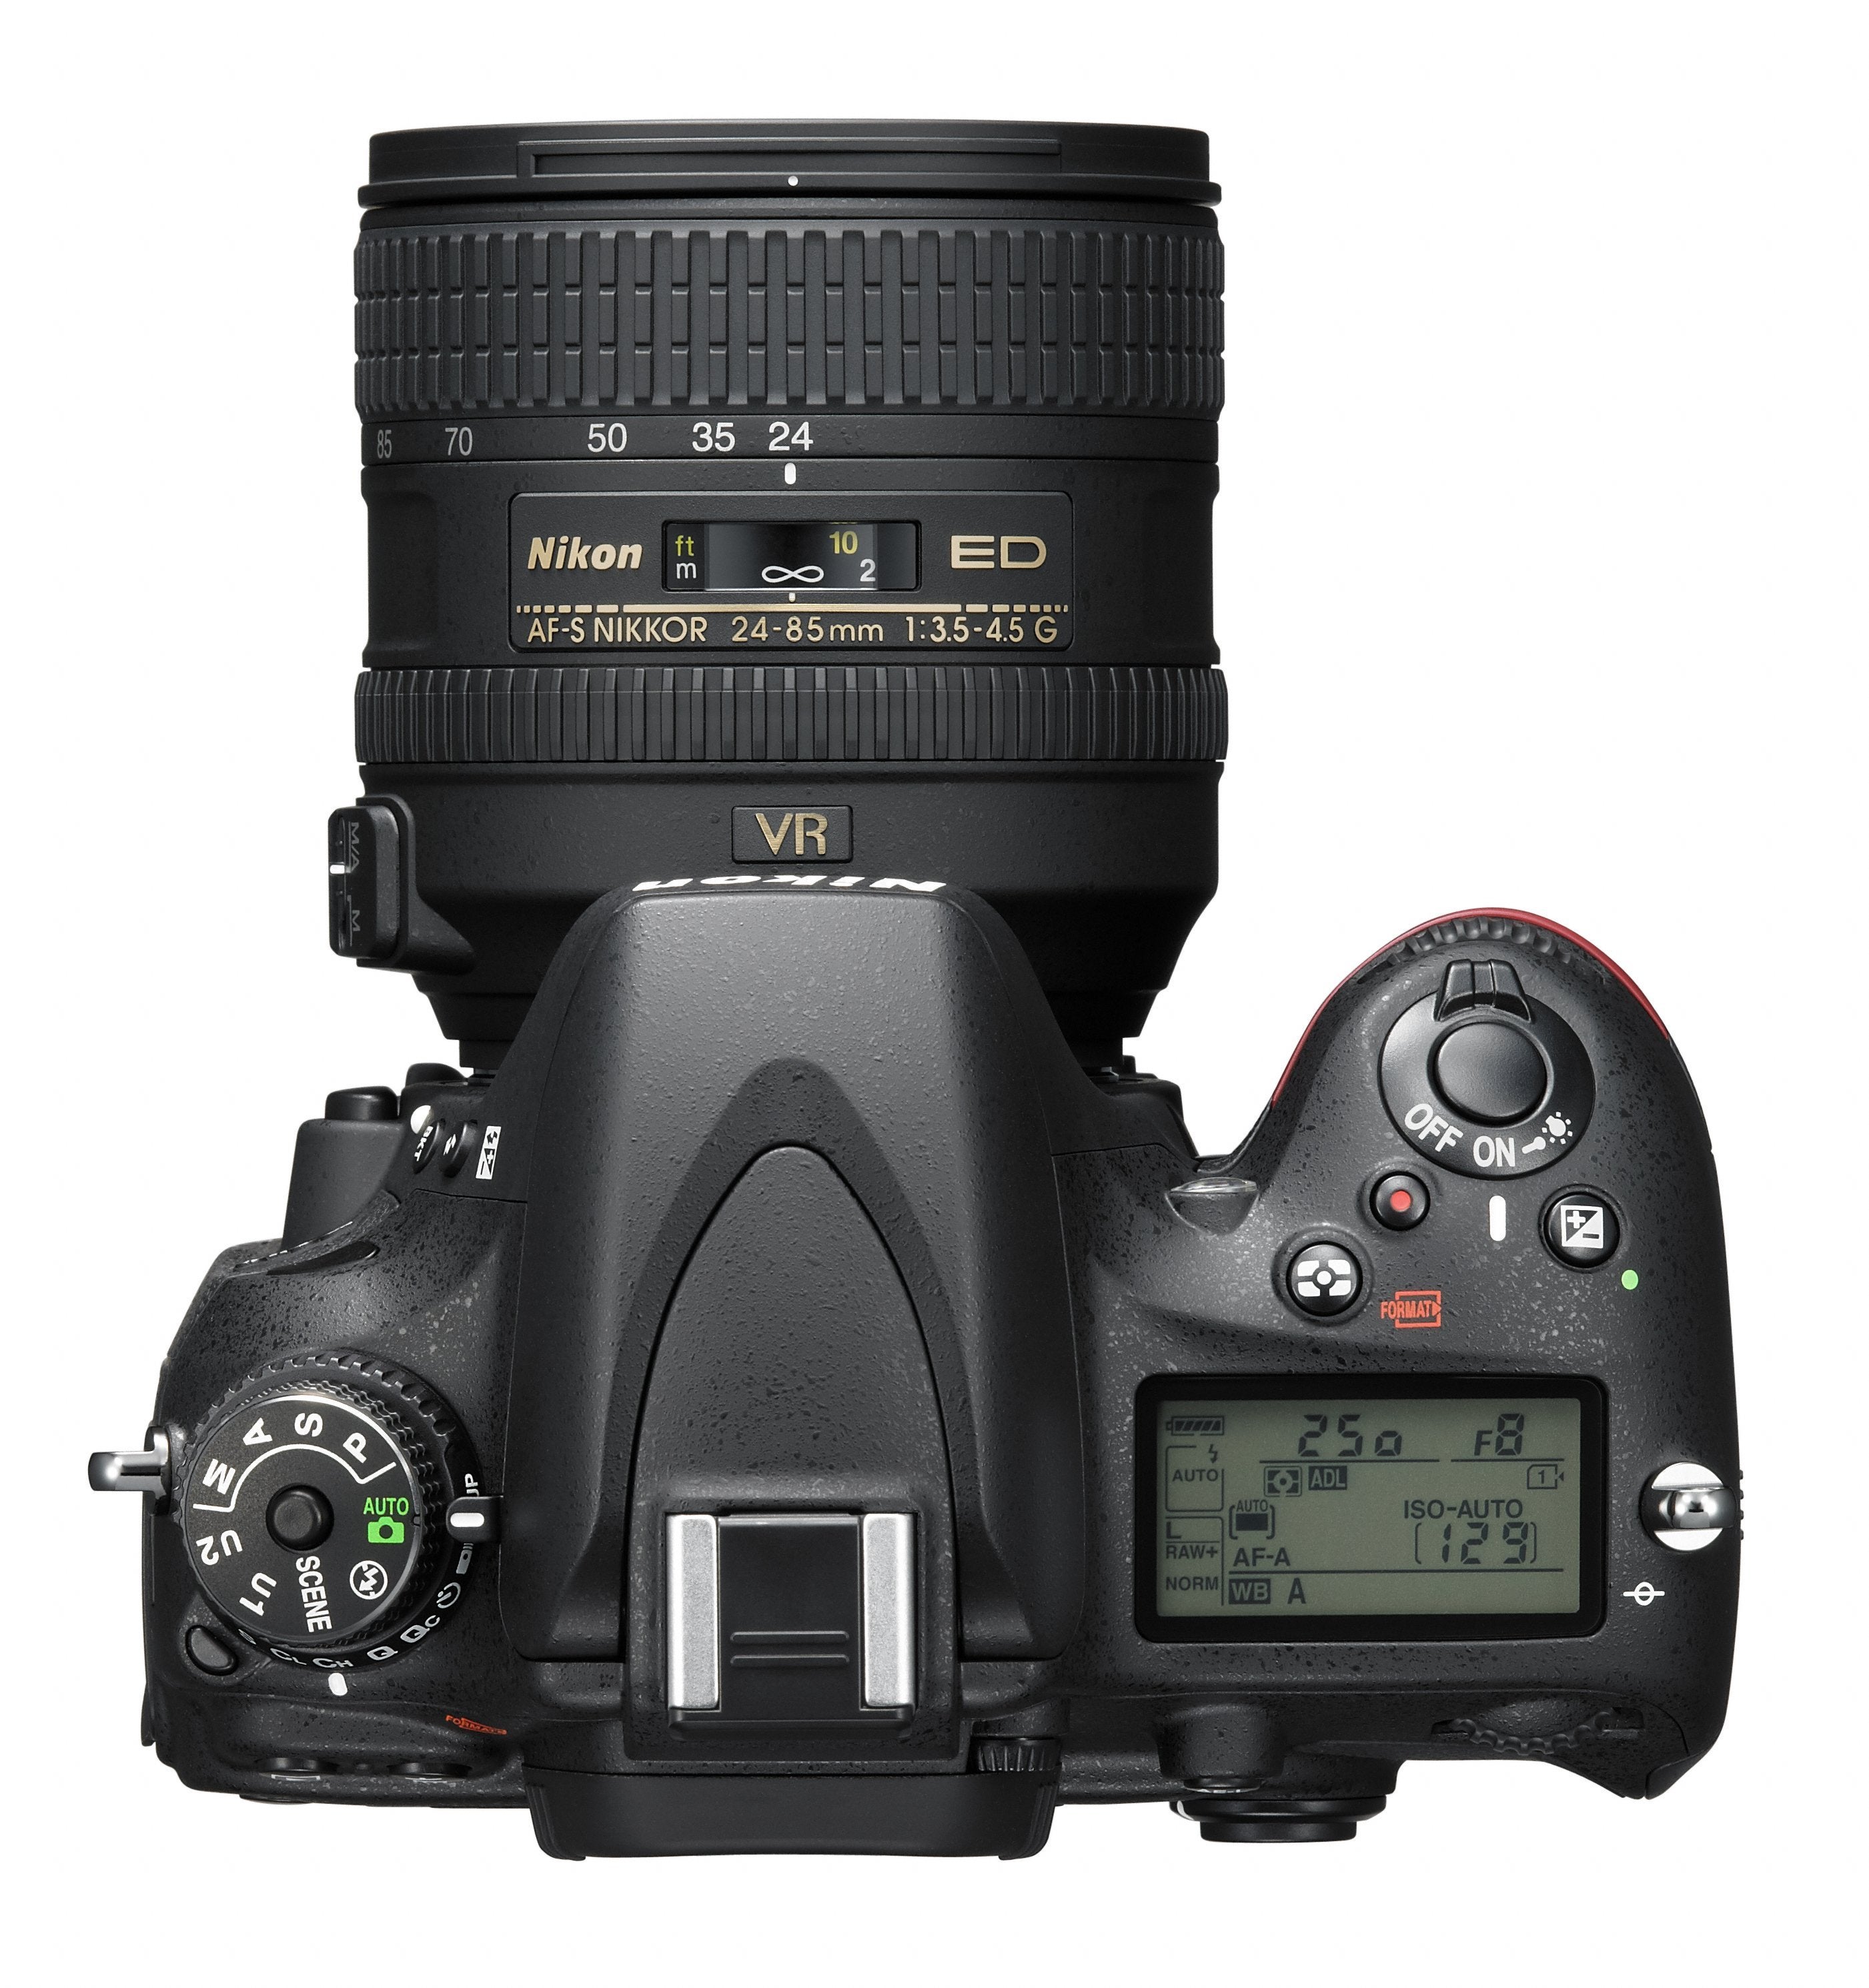 Nikon S New D Dslr Boasts New Features And A Lower Price Techhive